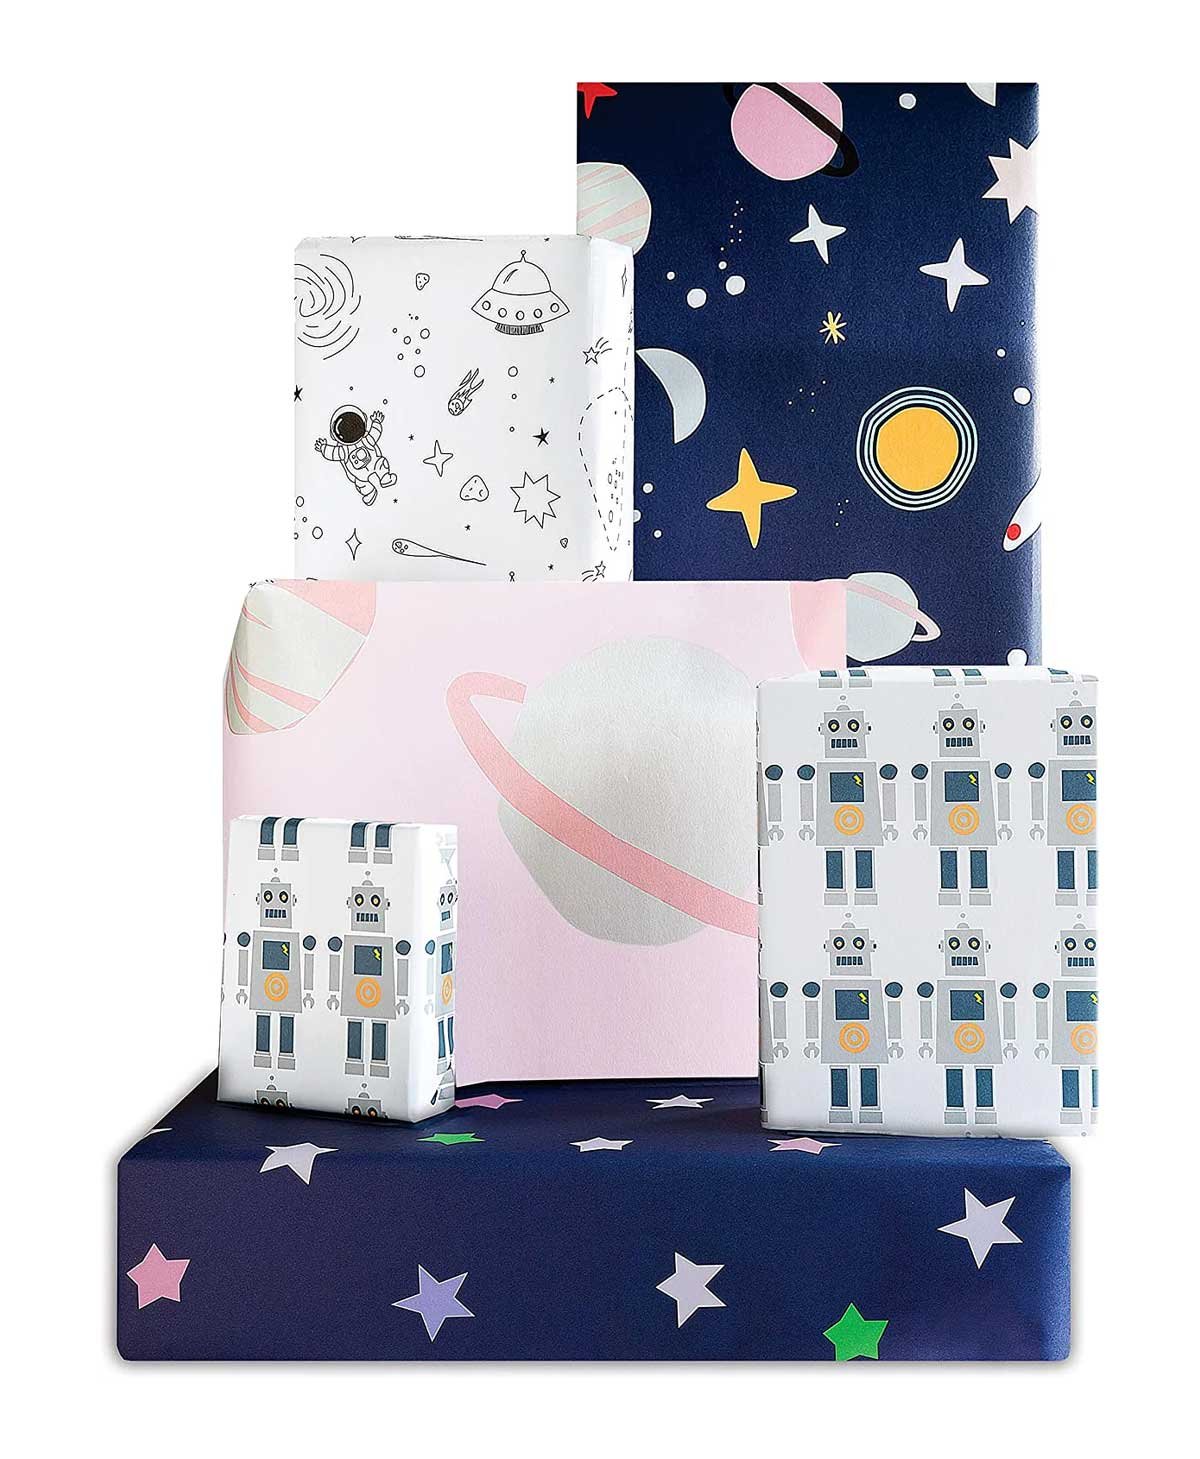 Personalized wrapping paper is a thoughtful and creative way to enhance your gift-giving experience.